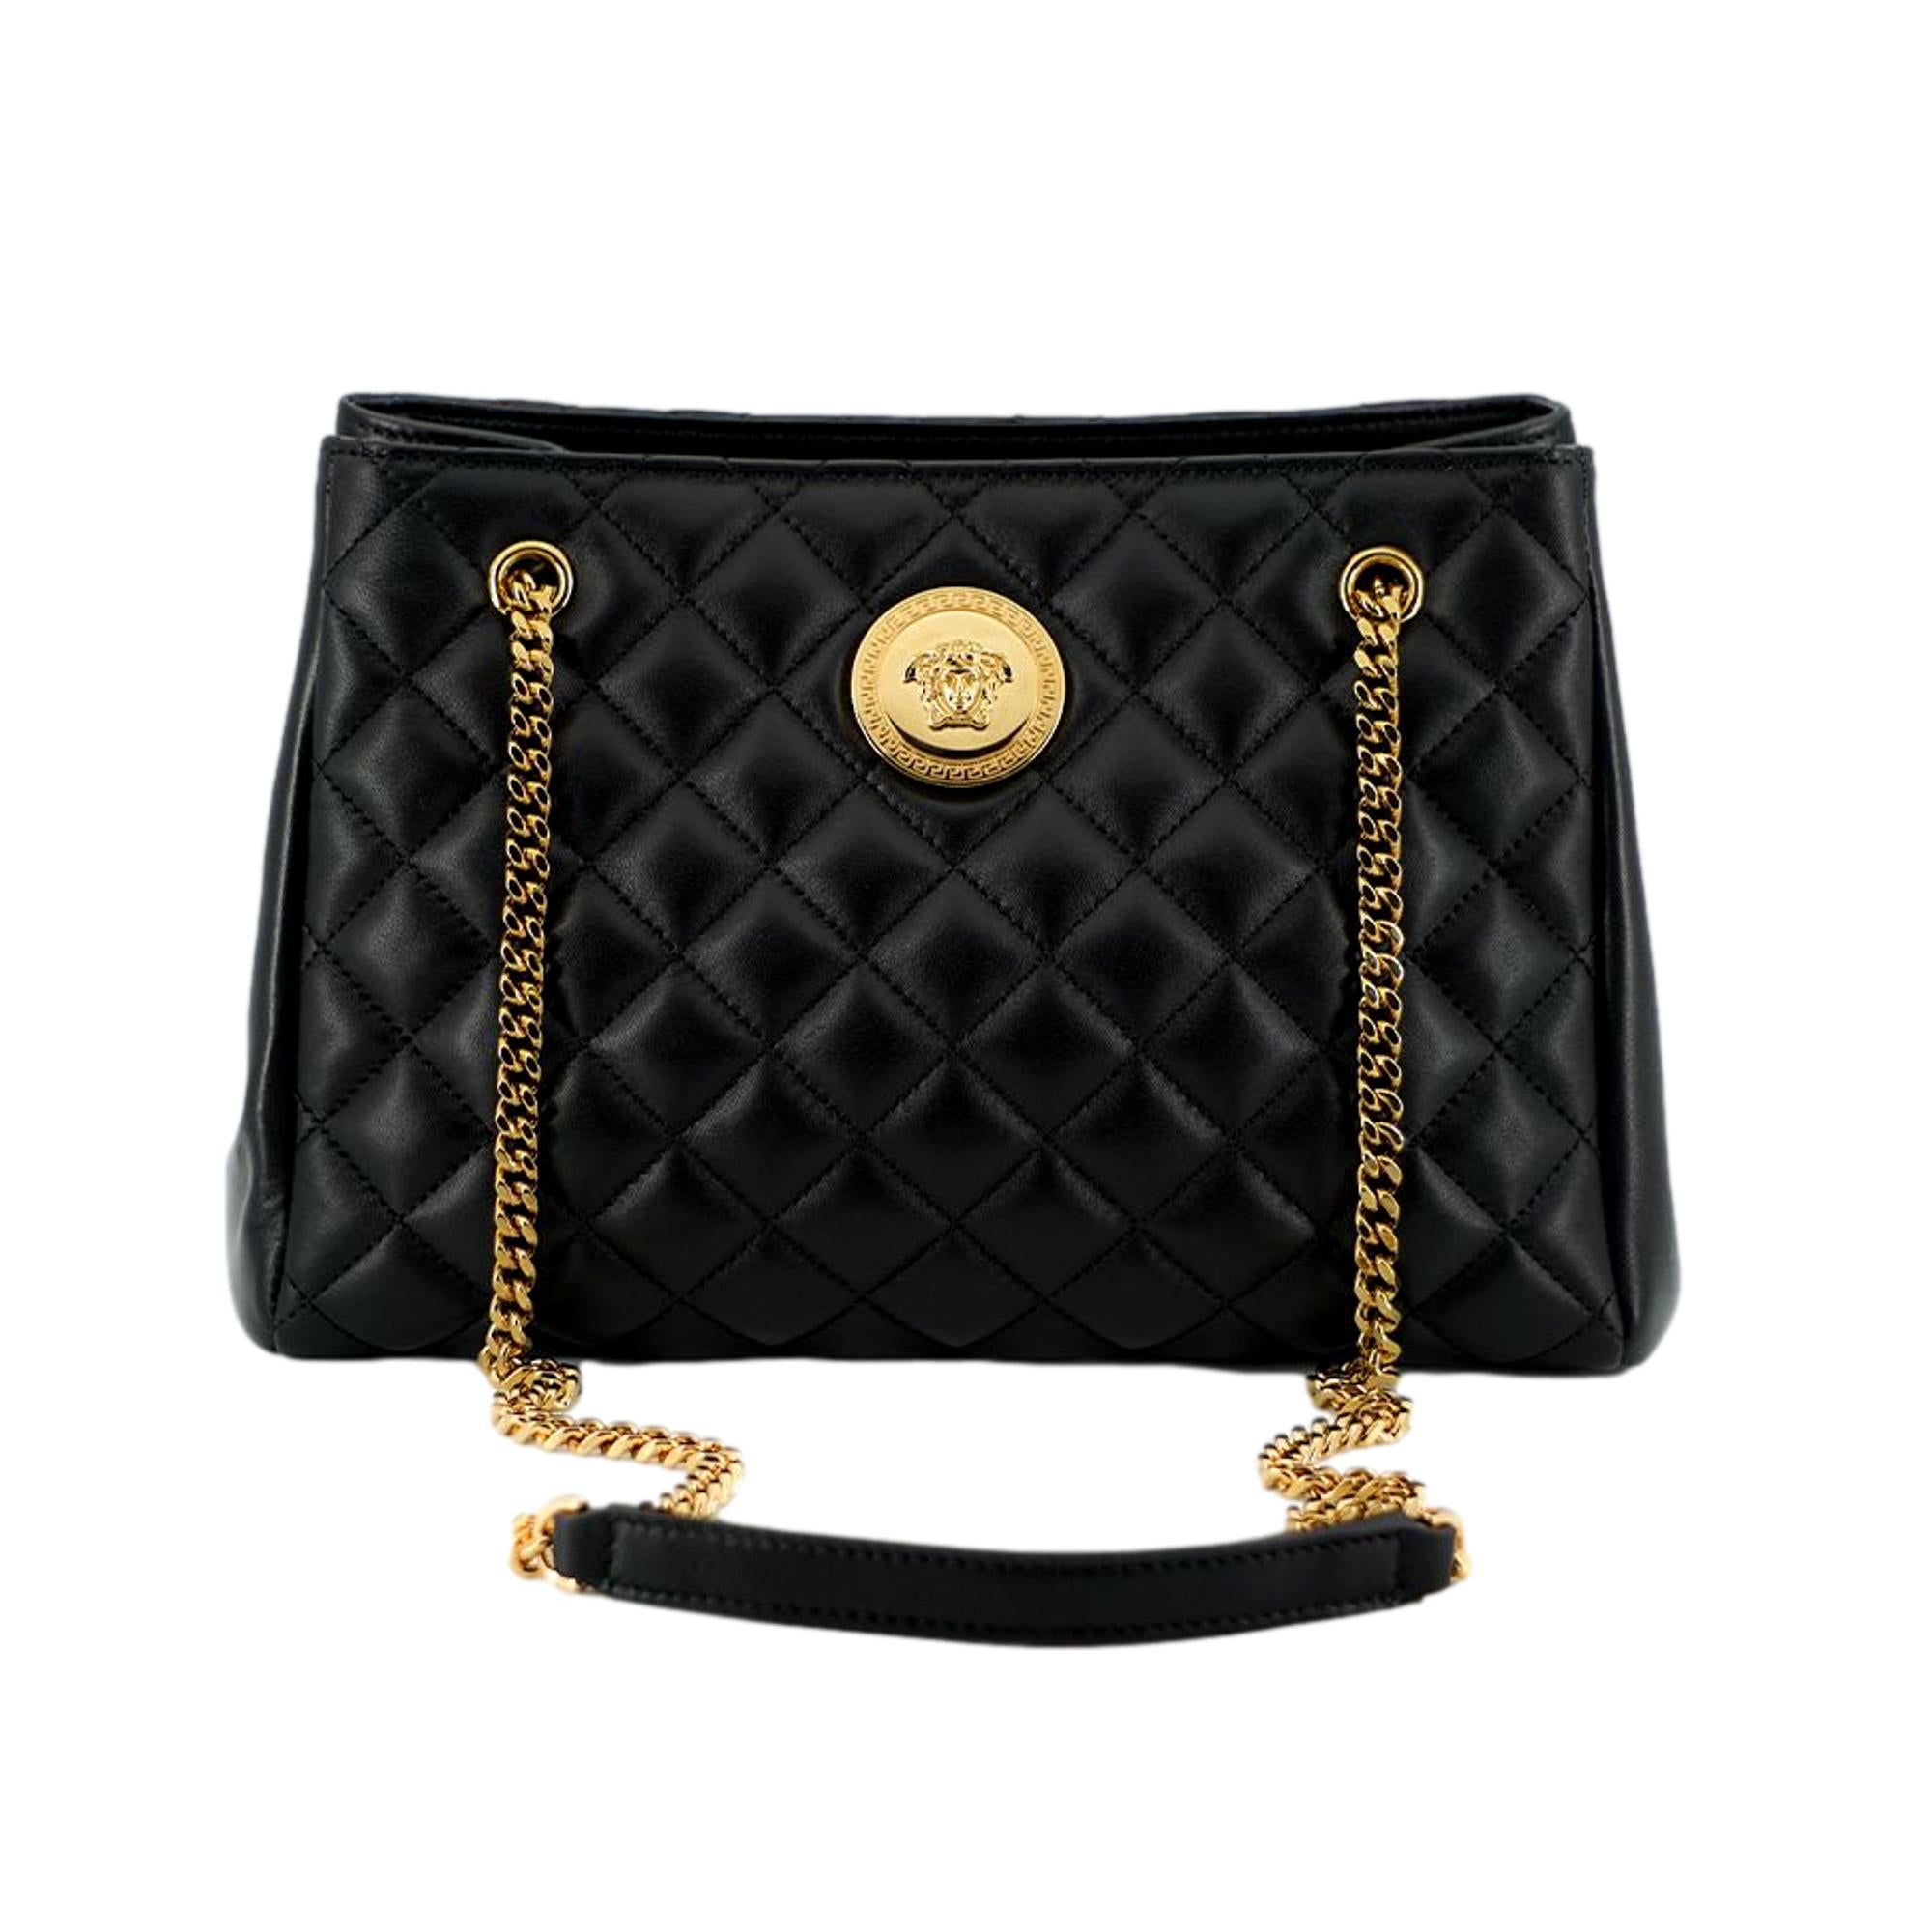 Versace Jeans Couture Black/Gold Small Nylon Shoulder Bag with Coin Purse  for womens, Black/Gold, 10-6.5-2.5 : Buy Online at Best Price in KSA - Souq  is now Amazon.sa: Fashion